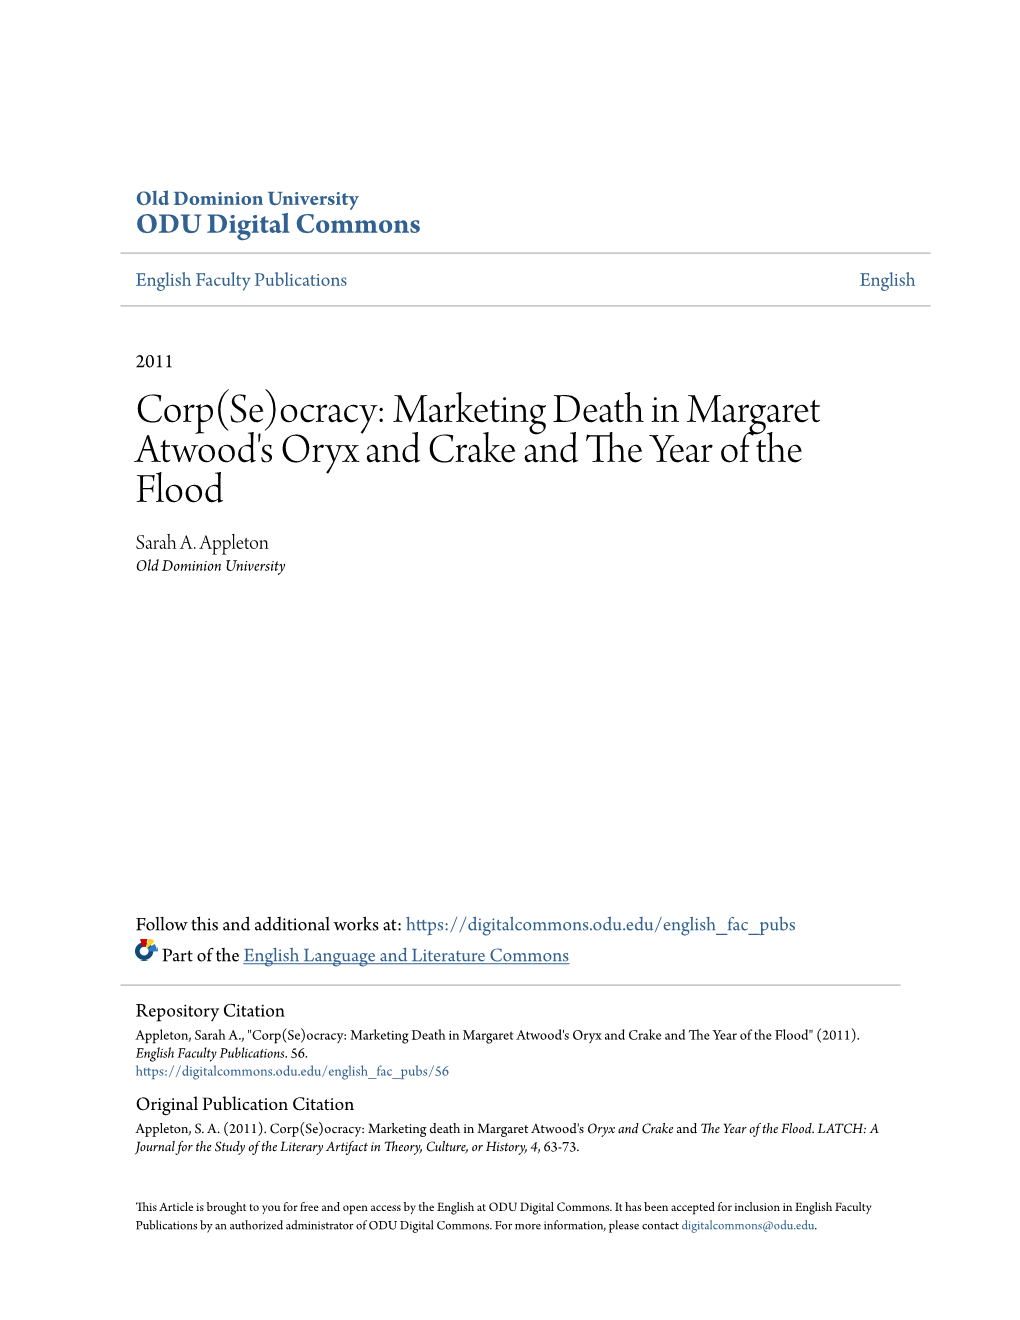 Marketing Death in Margaret Atwood's Oryx and Crake and the Year of the Flood